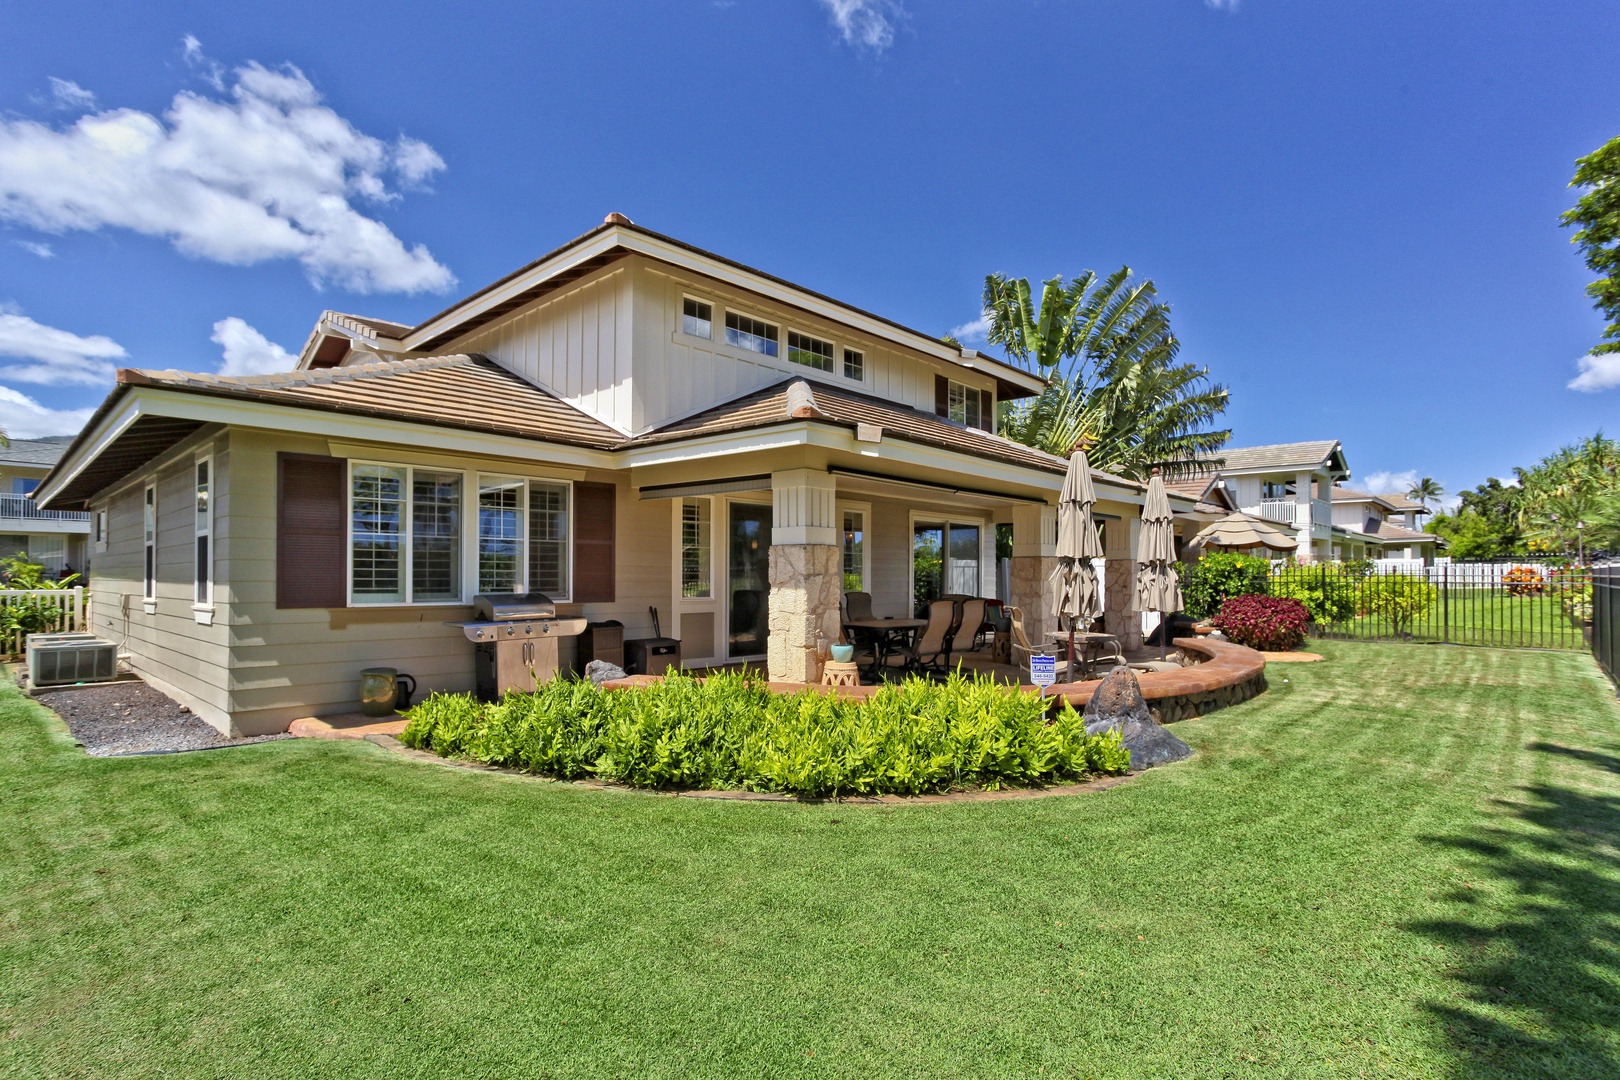 Kapolei Vacation Rentals, Ko Olina Kai Estate #20 - The manicured lawns of the golf course around the home.